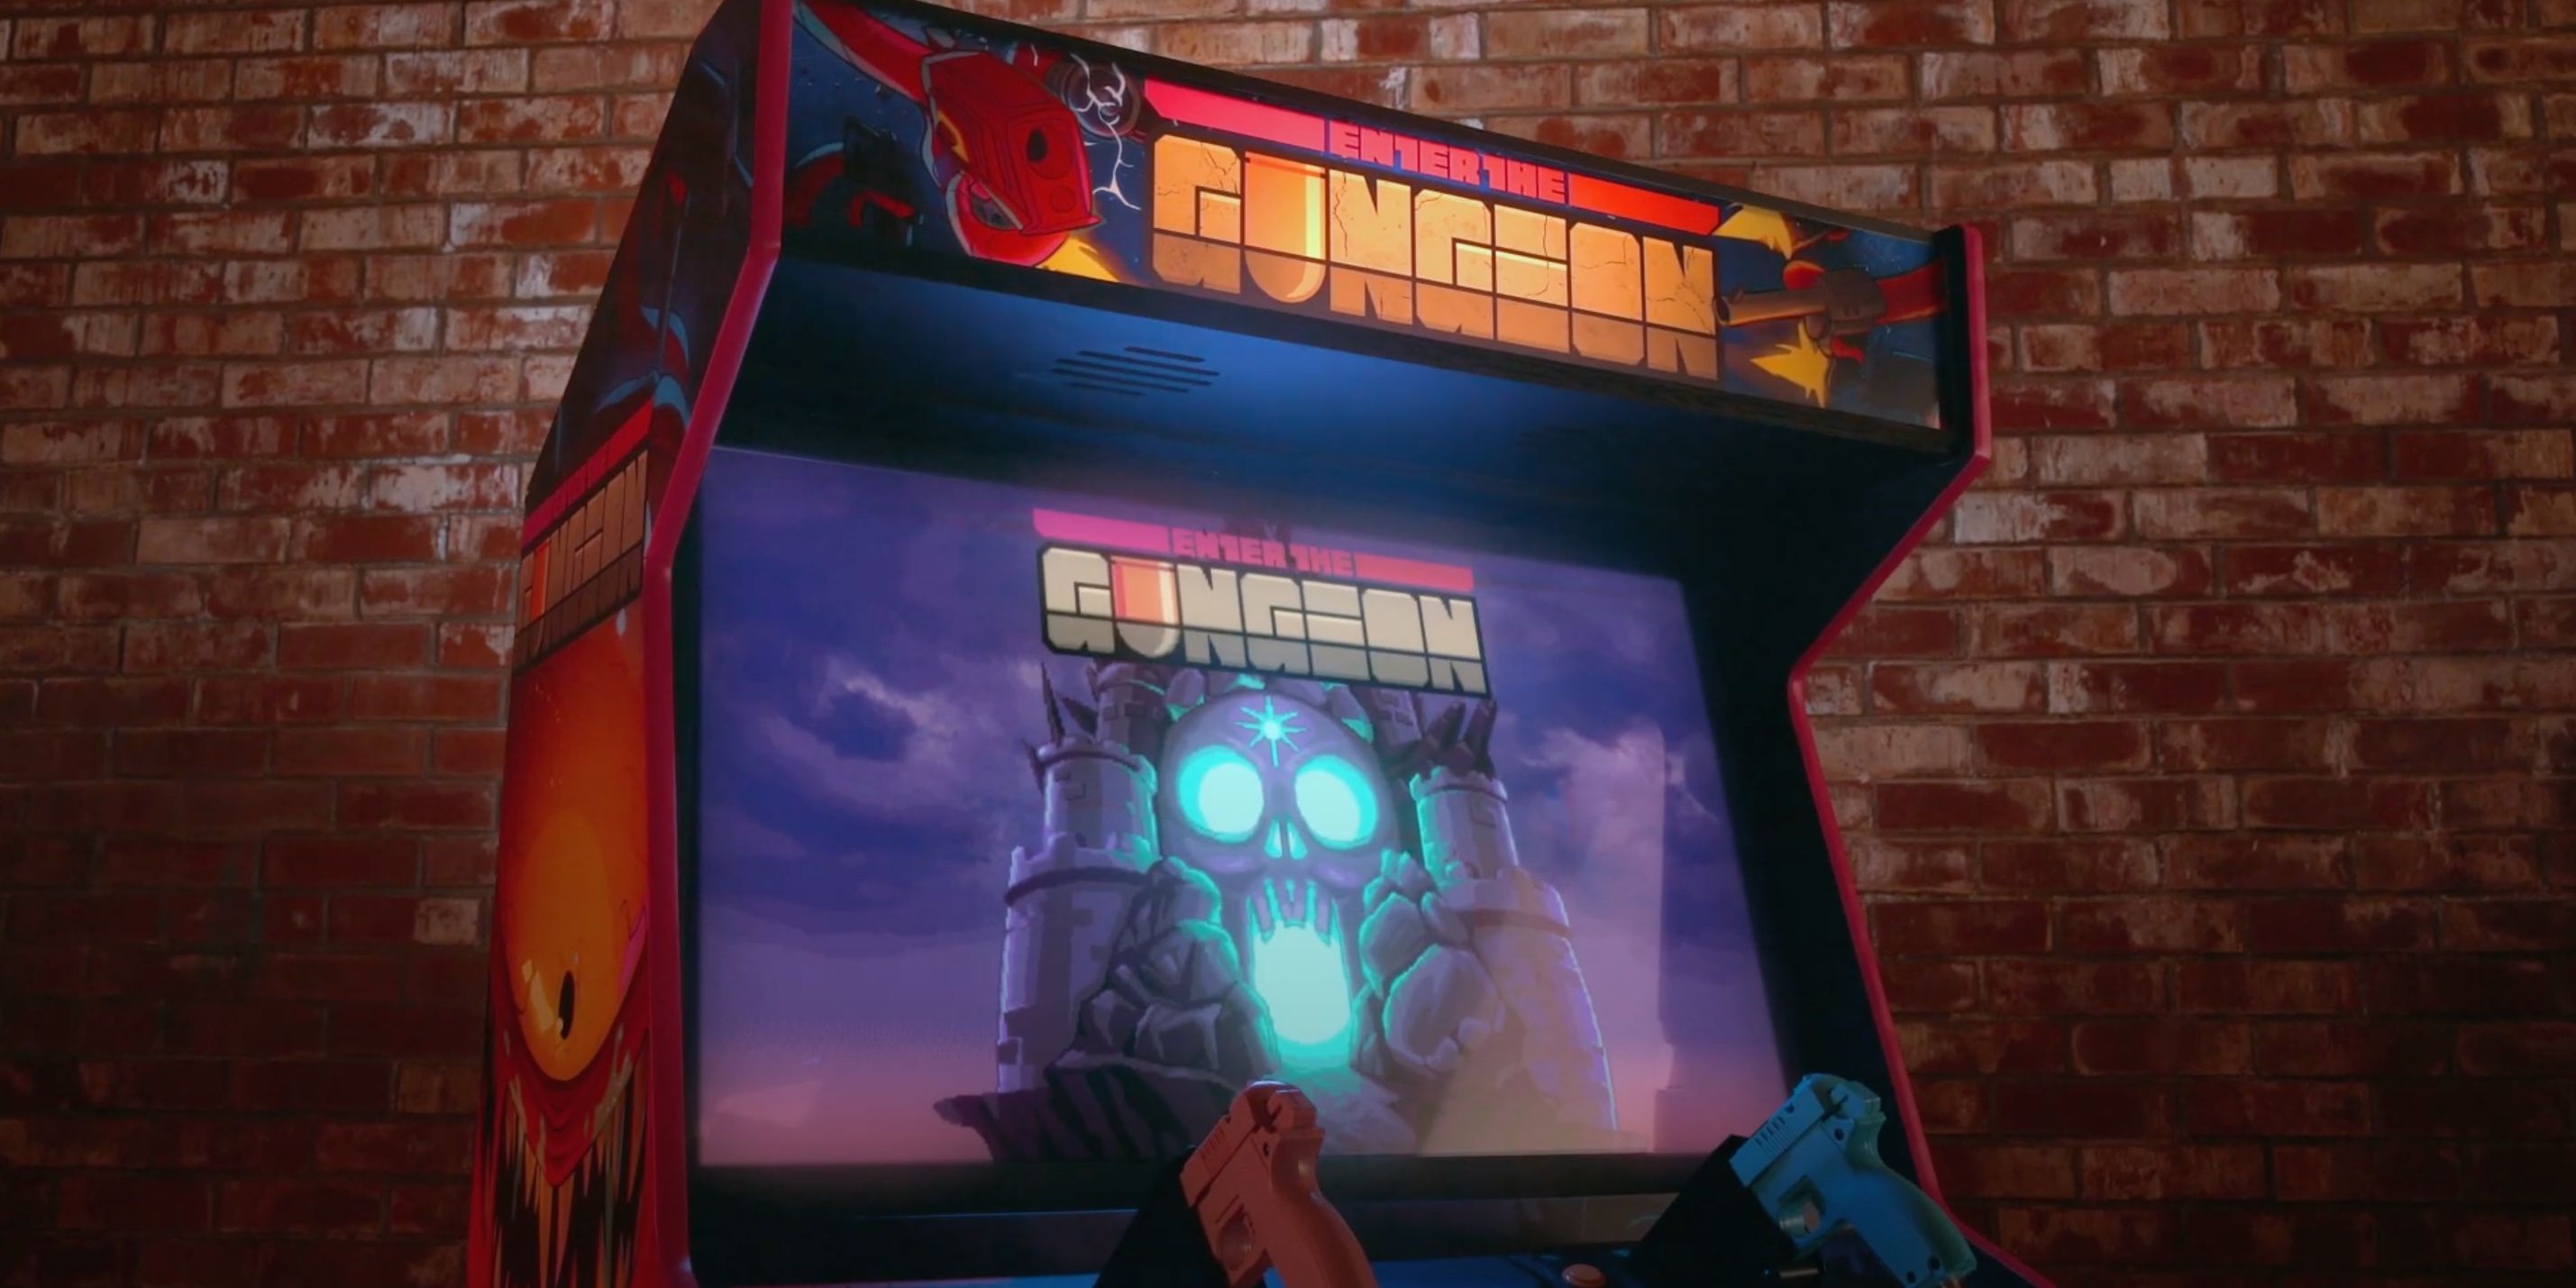 Enter the Gungeon House of the Gundead arcade game